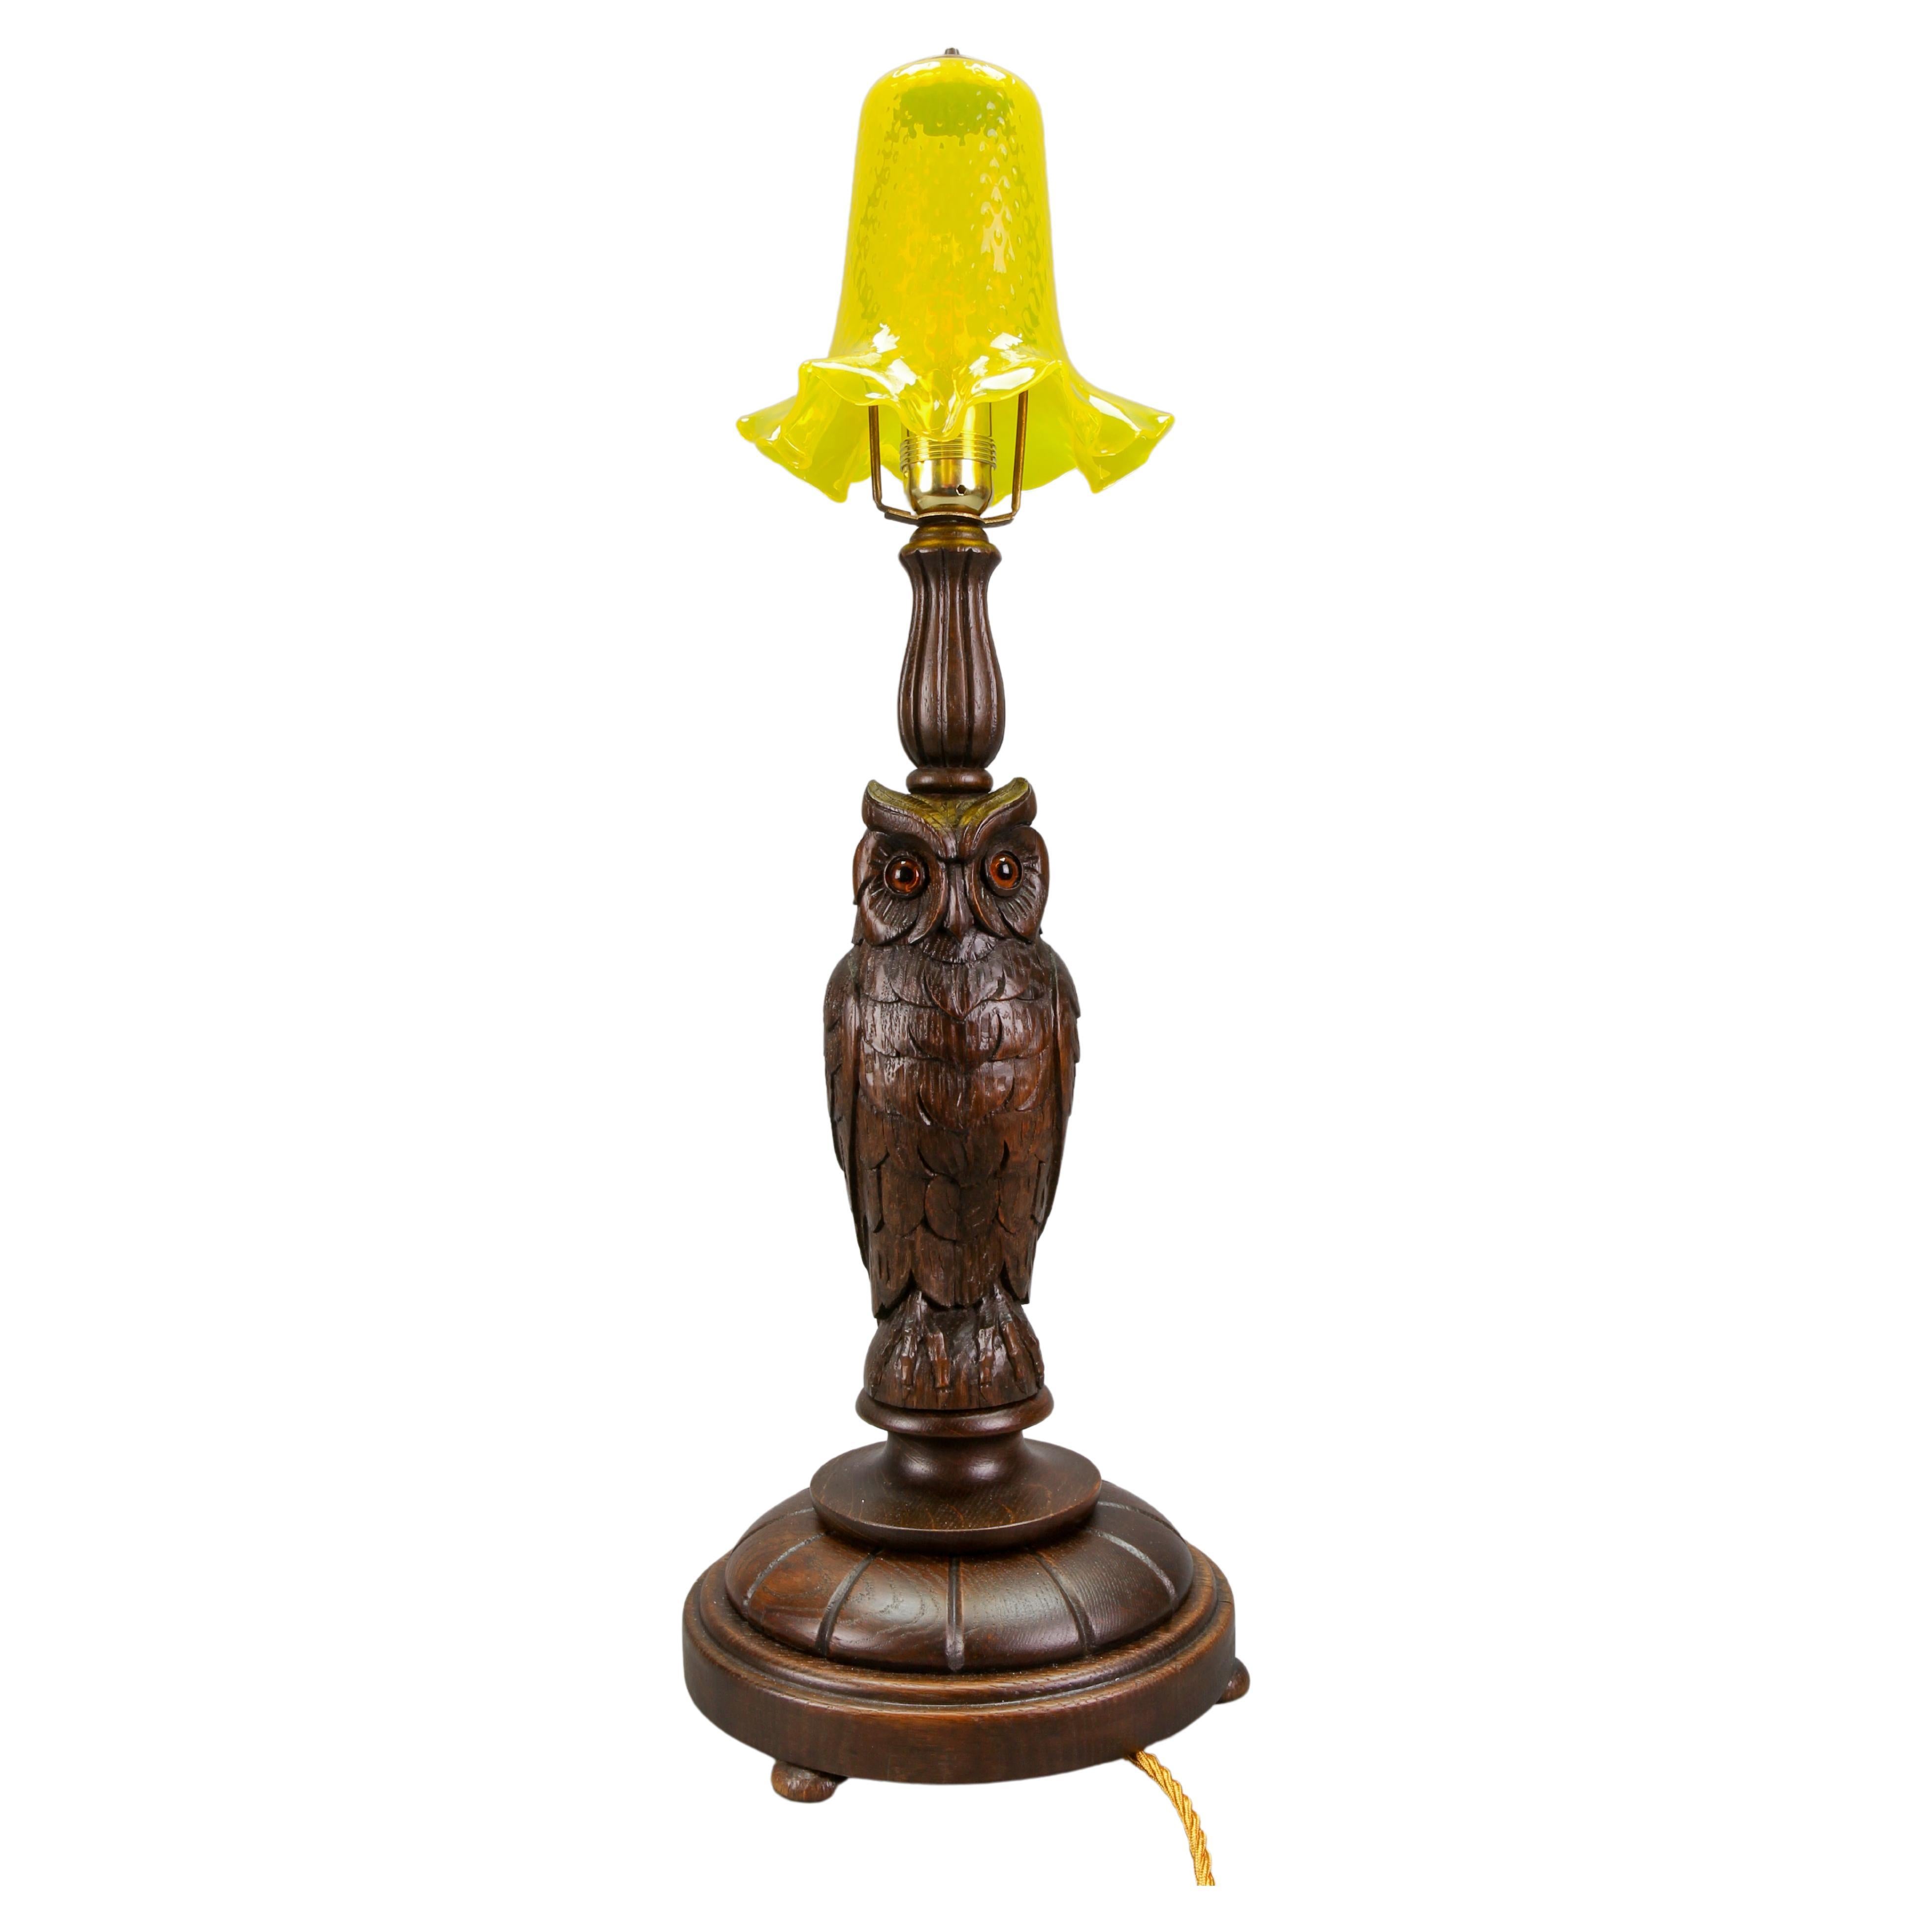 Art Deco Table Lamp with Owl Sculpture and Yellow Glass Lampshade, ca. 1920 For Sale